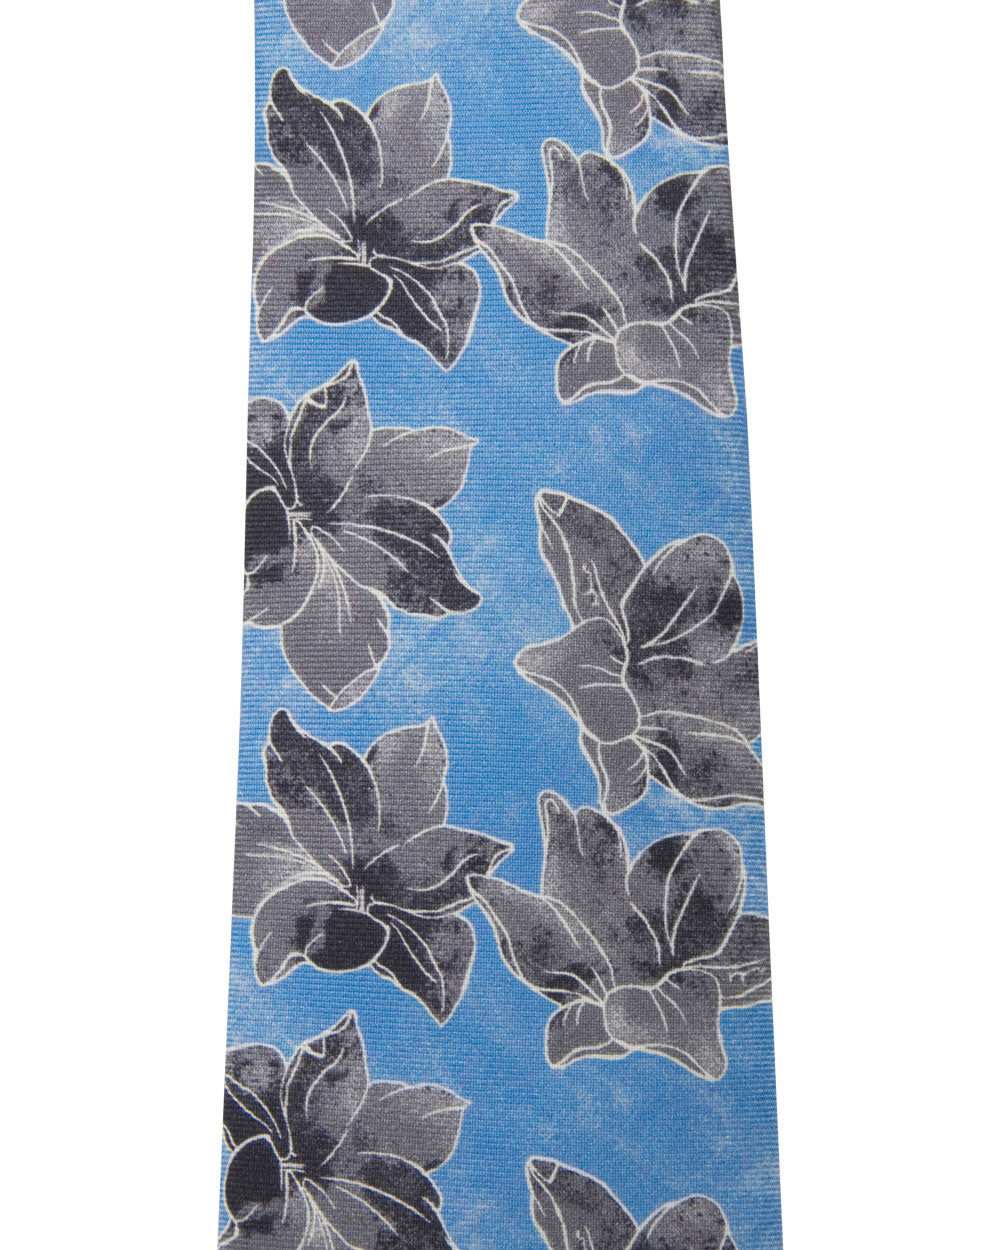 Sky Blue and Grey Floral Tie